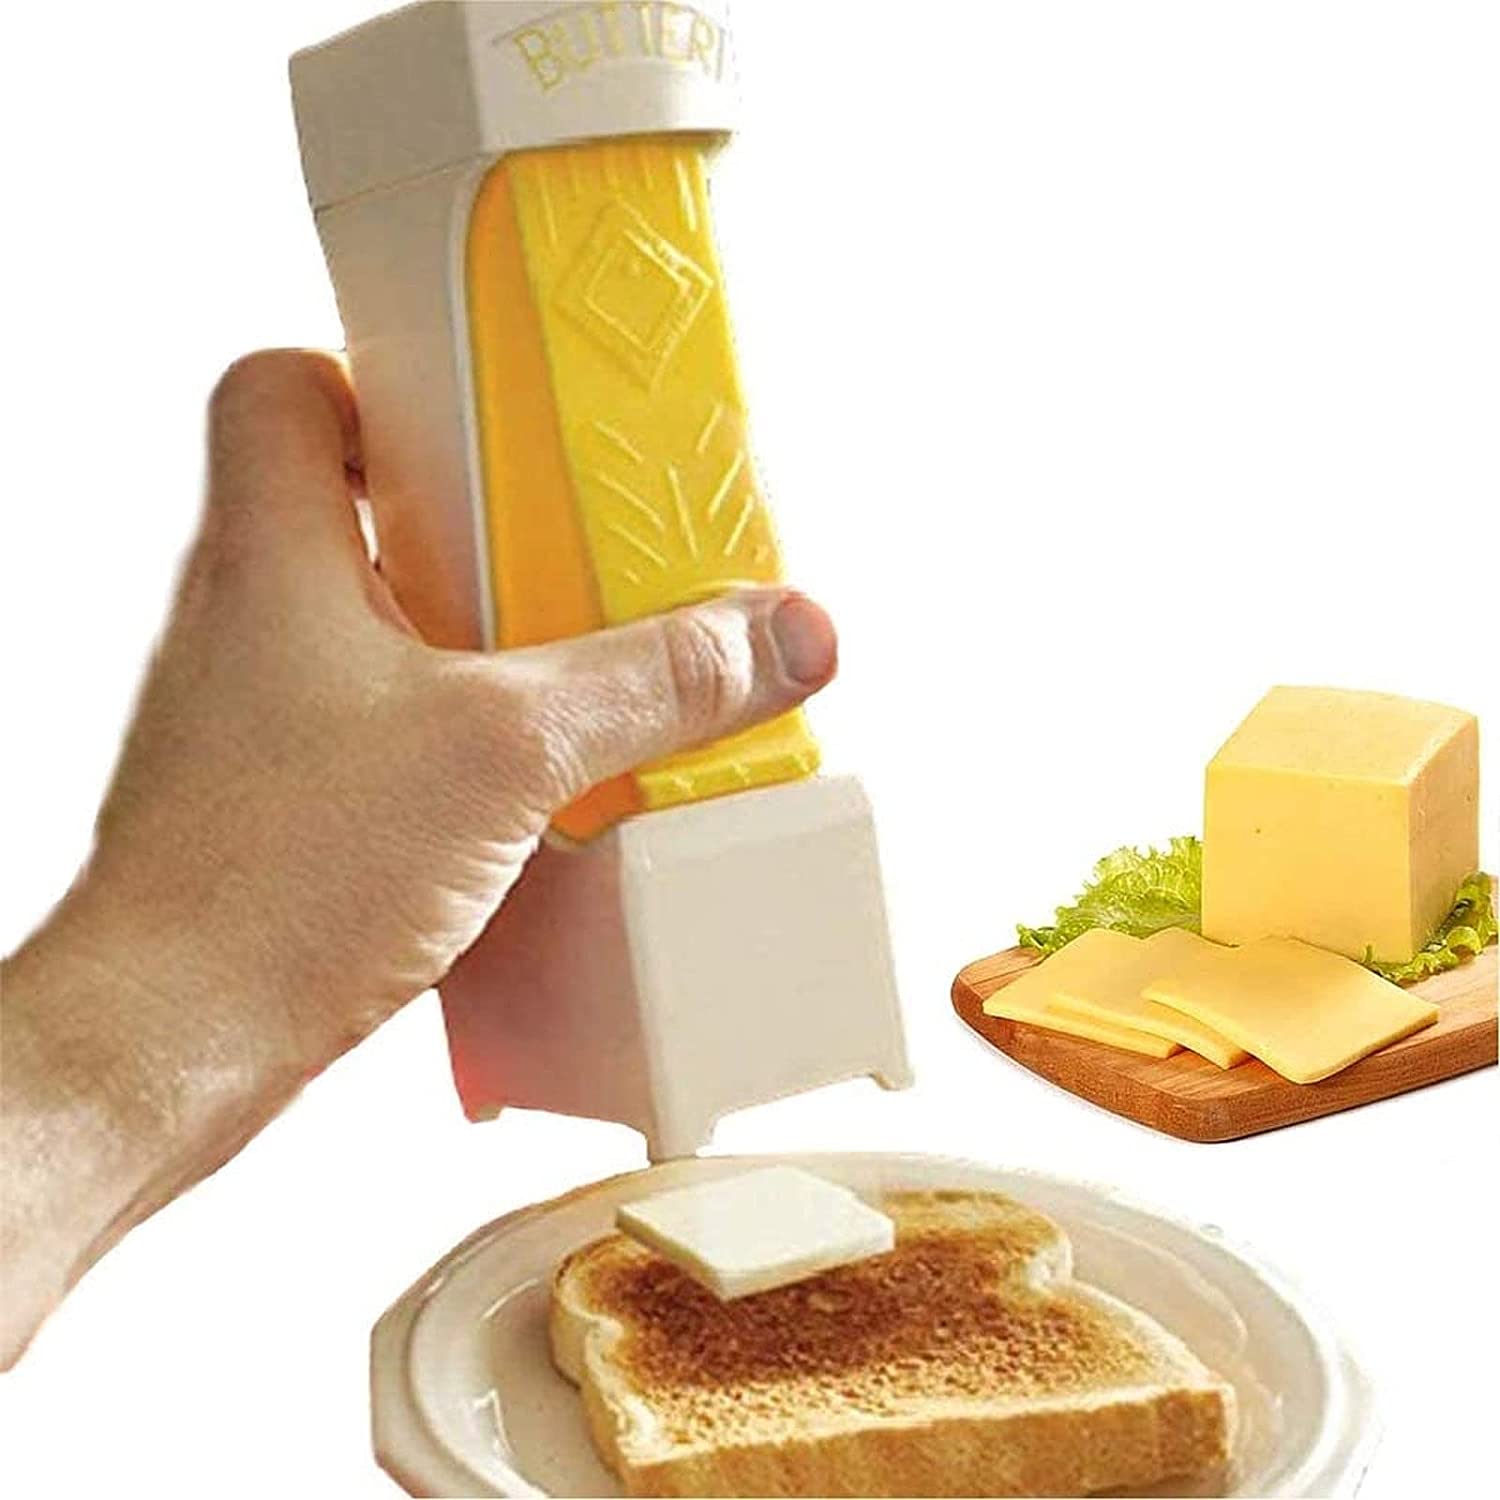 Butter knife one-touch stainless steel blade, cheese divider, butter for  baking bread, cakes, cookies, bread